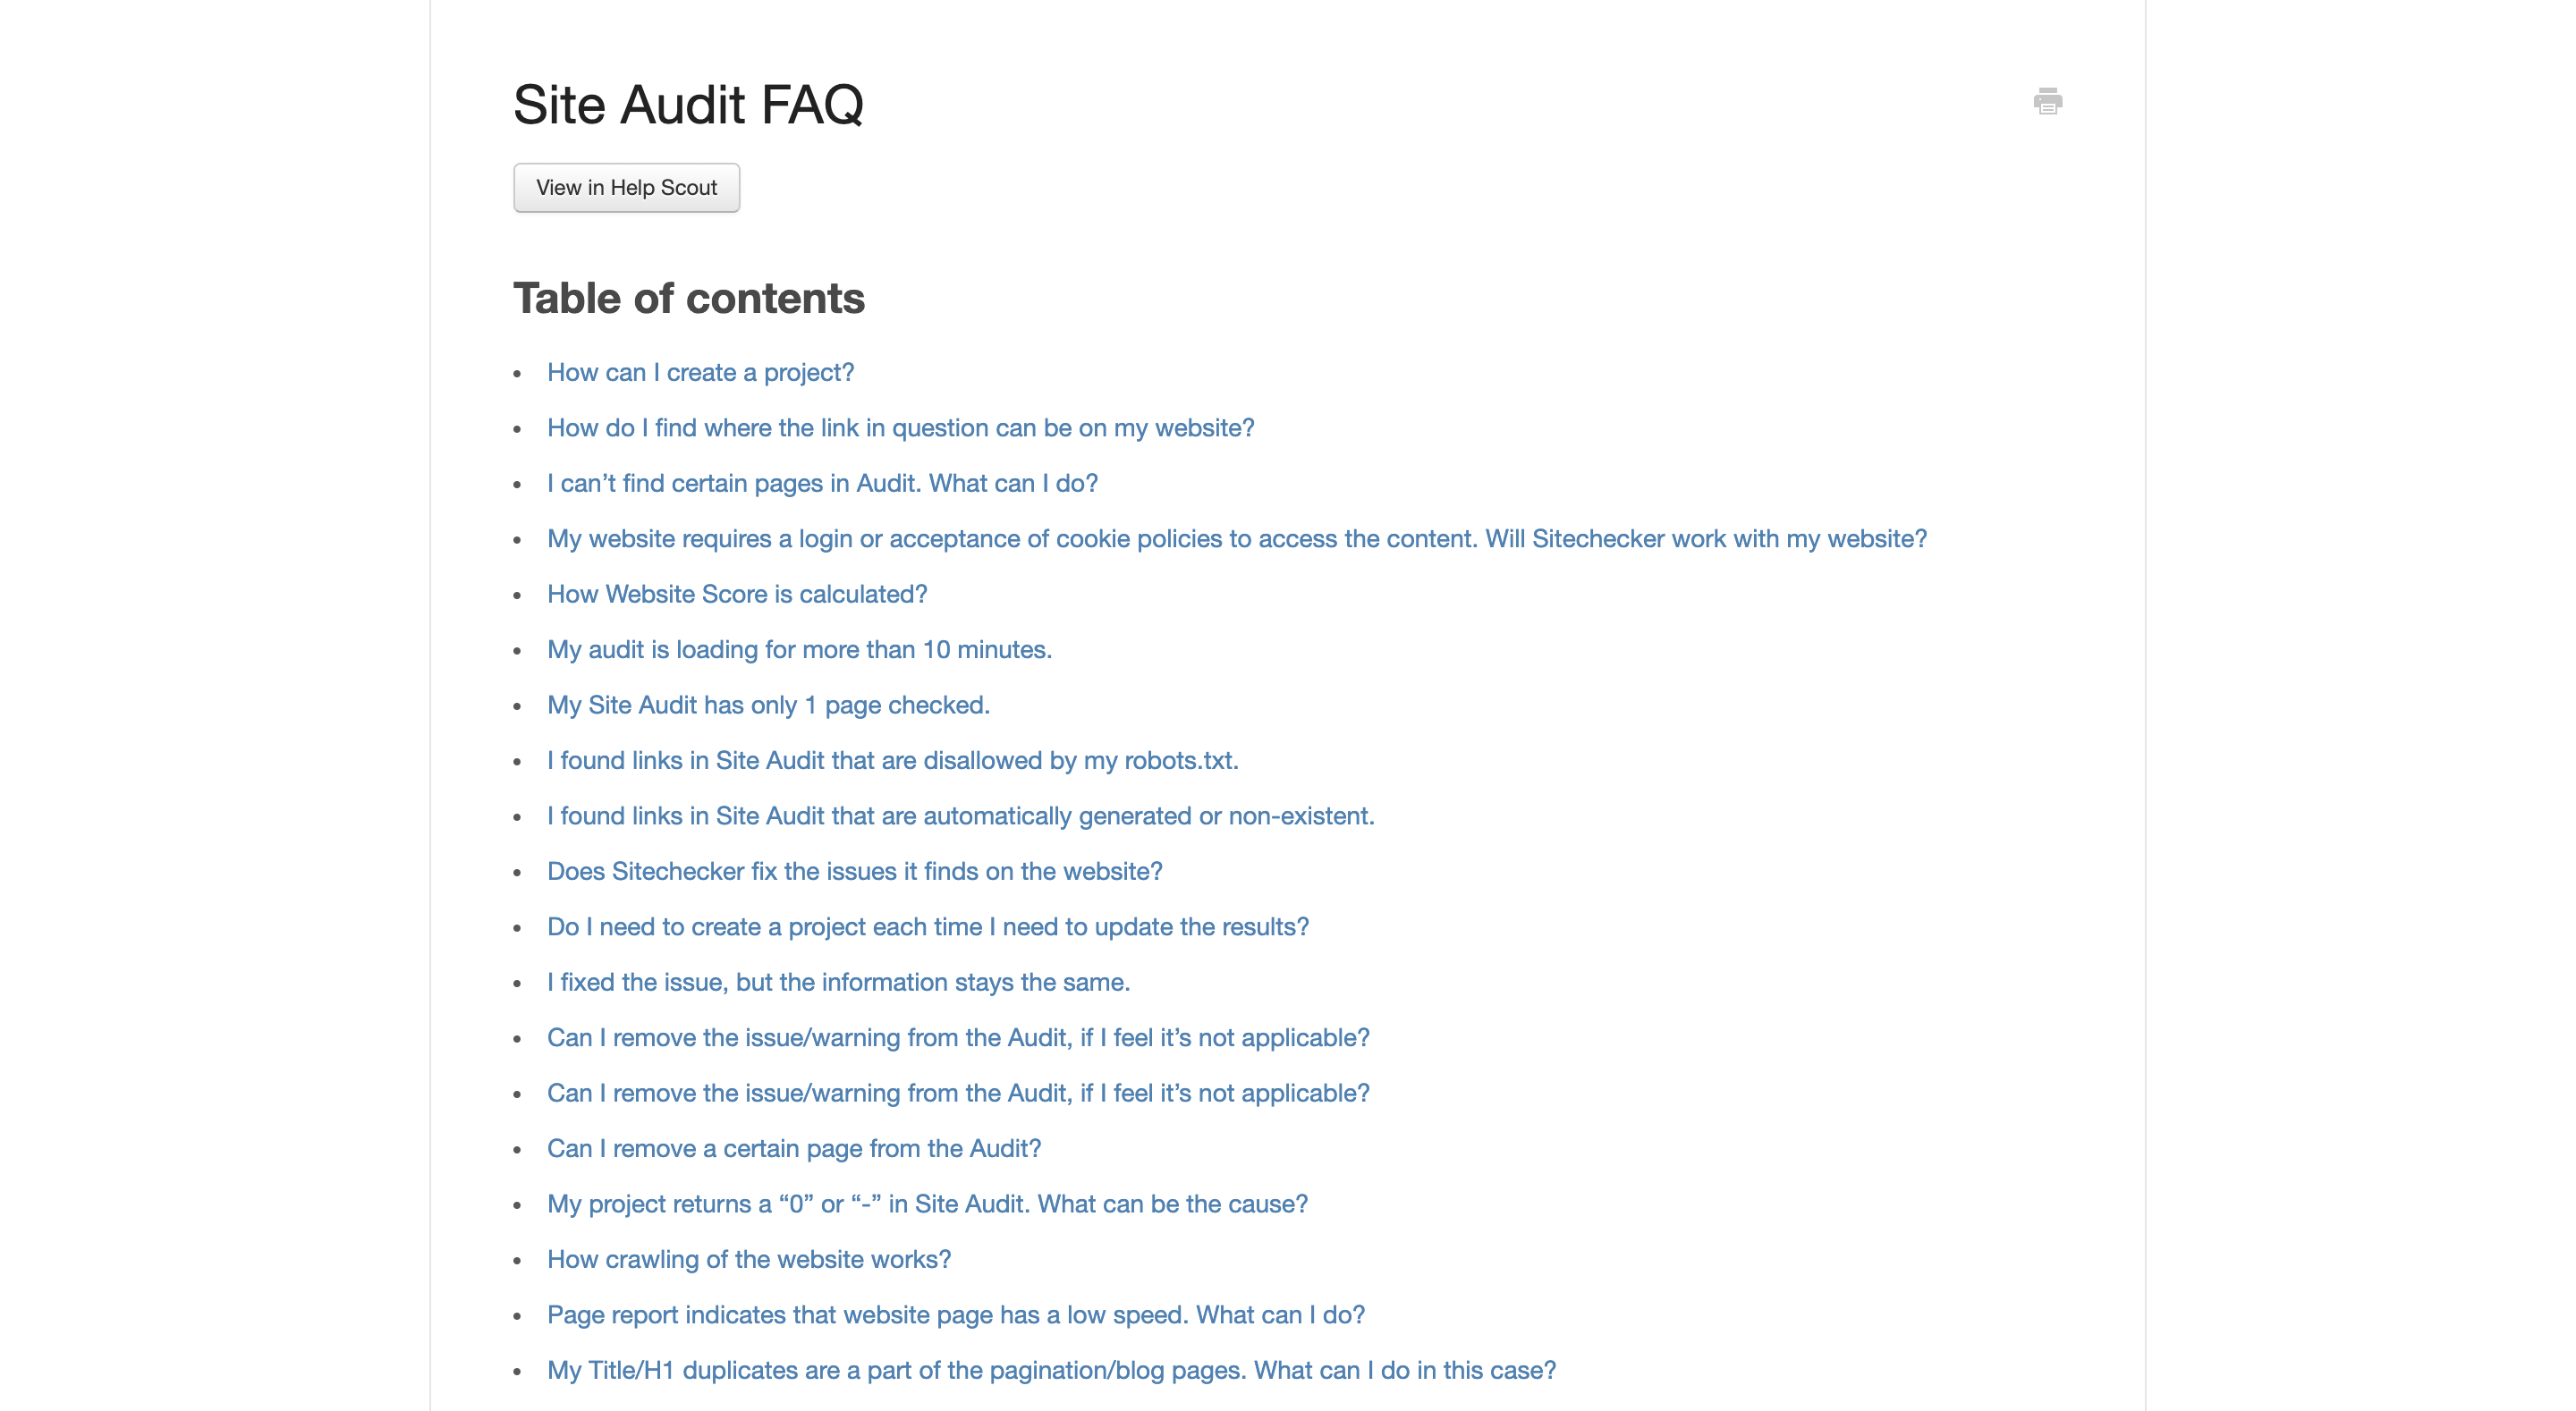 site audit frequently asked questions